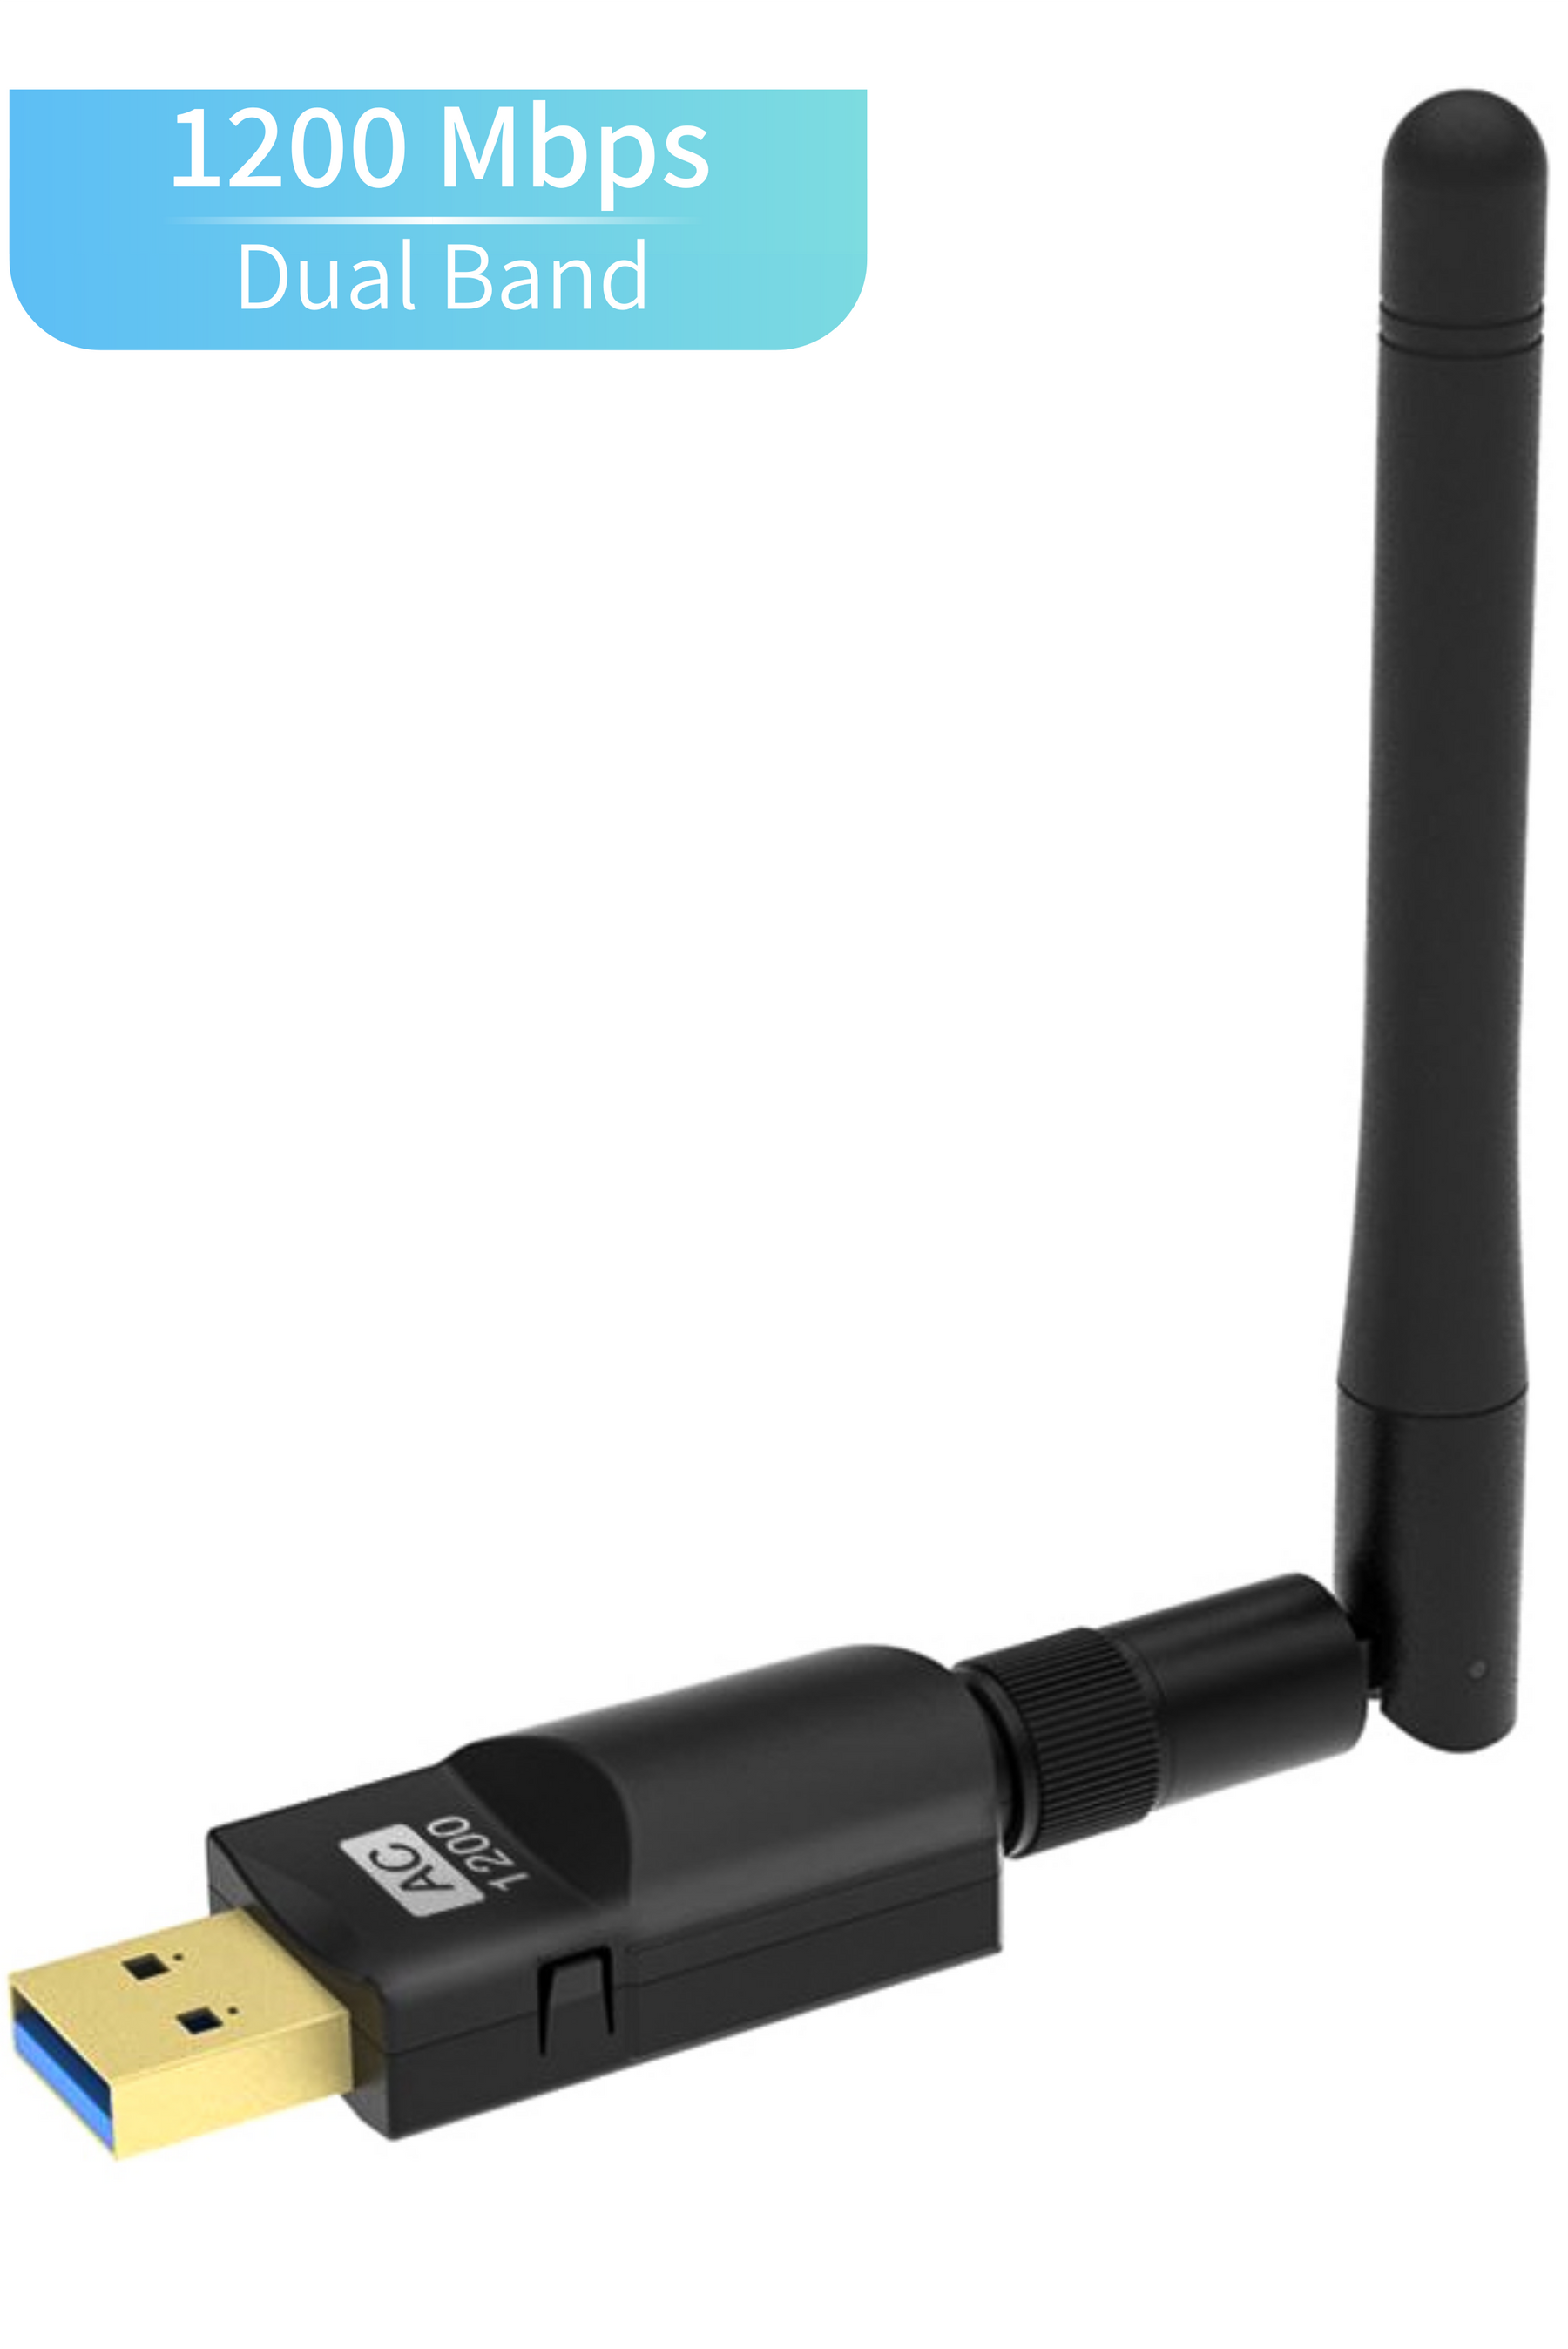 Brightside Wifi-adapter - Antenne - 1200Mbps - 5GHz & 2.4GHz- Windows/Mac